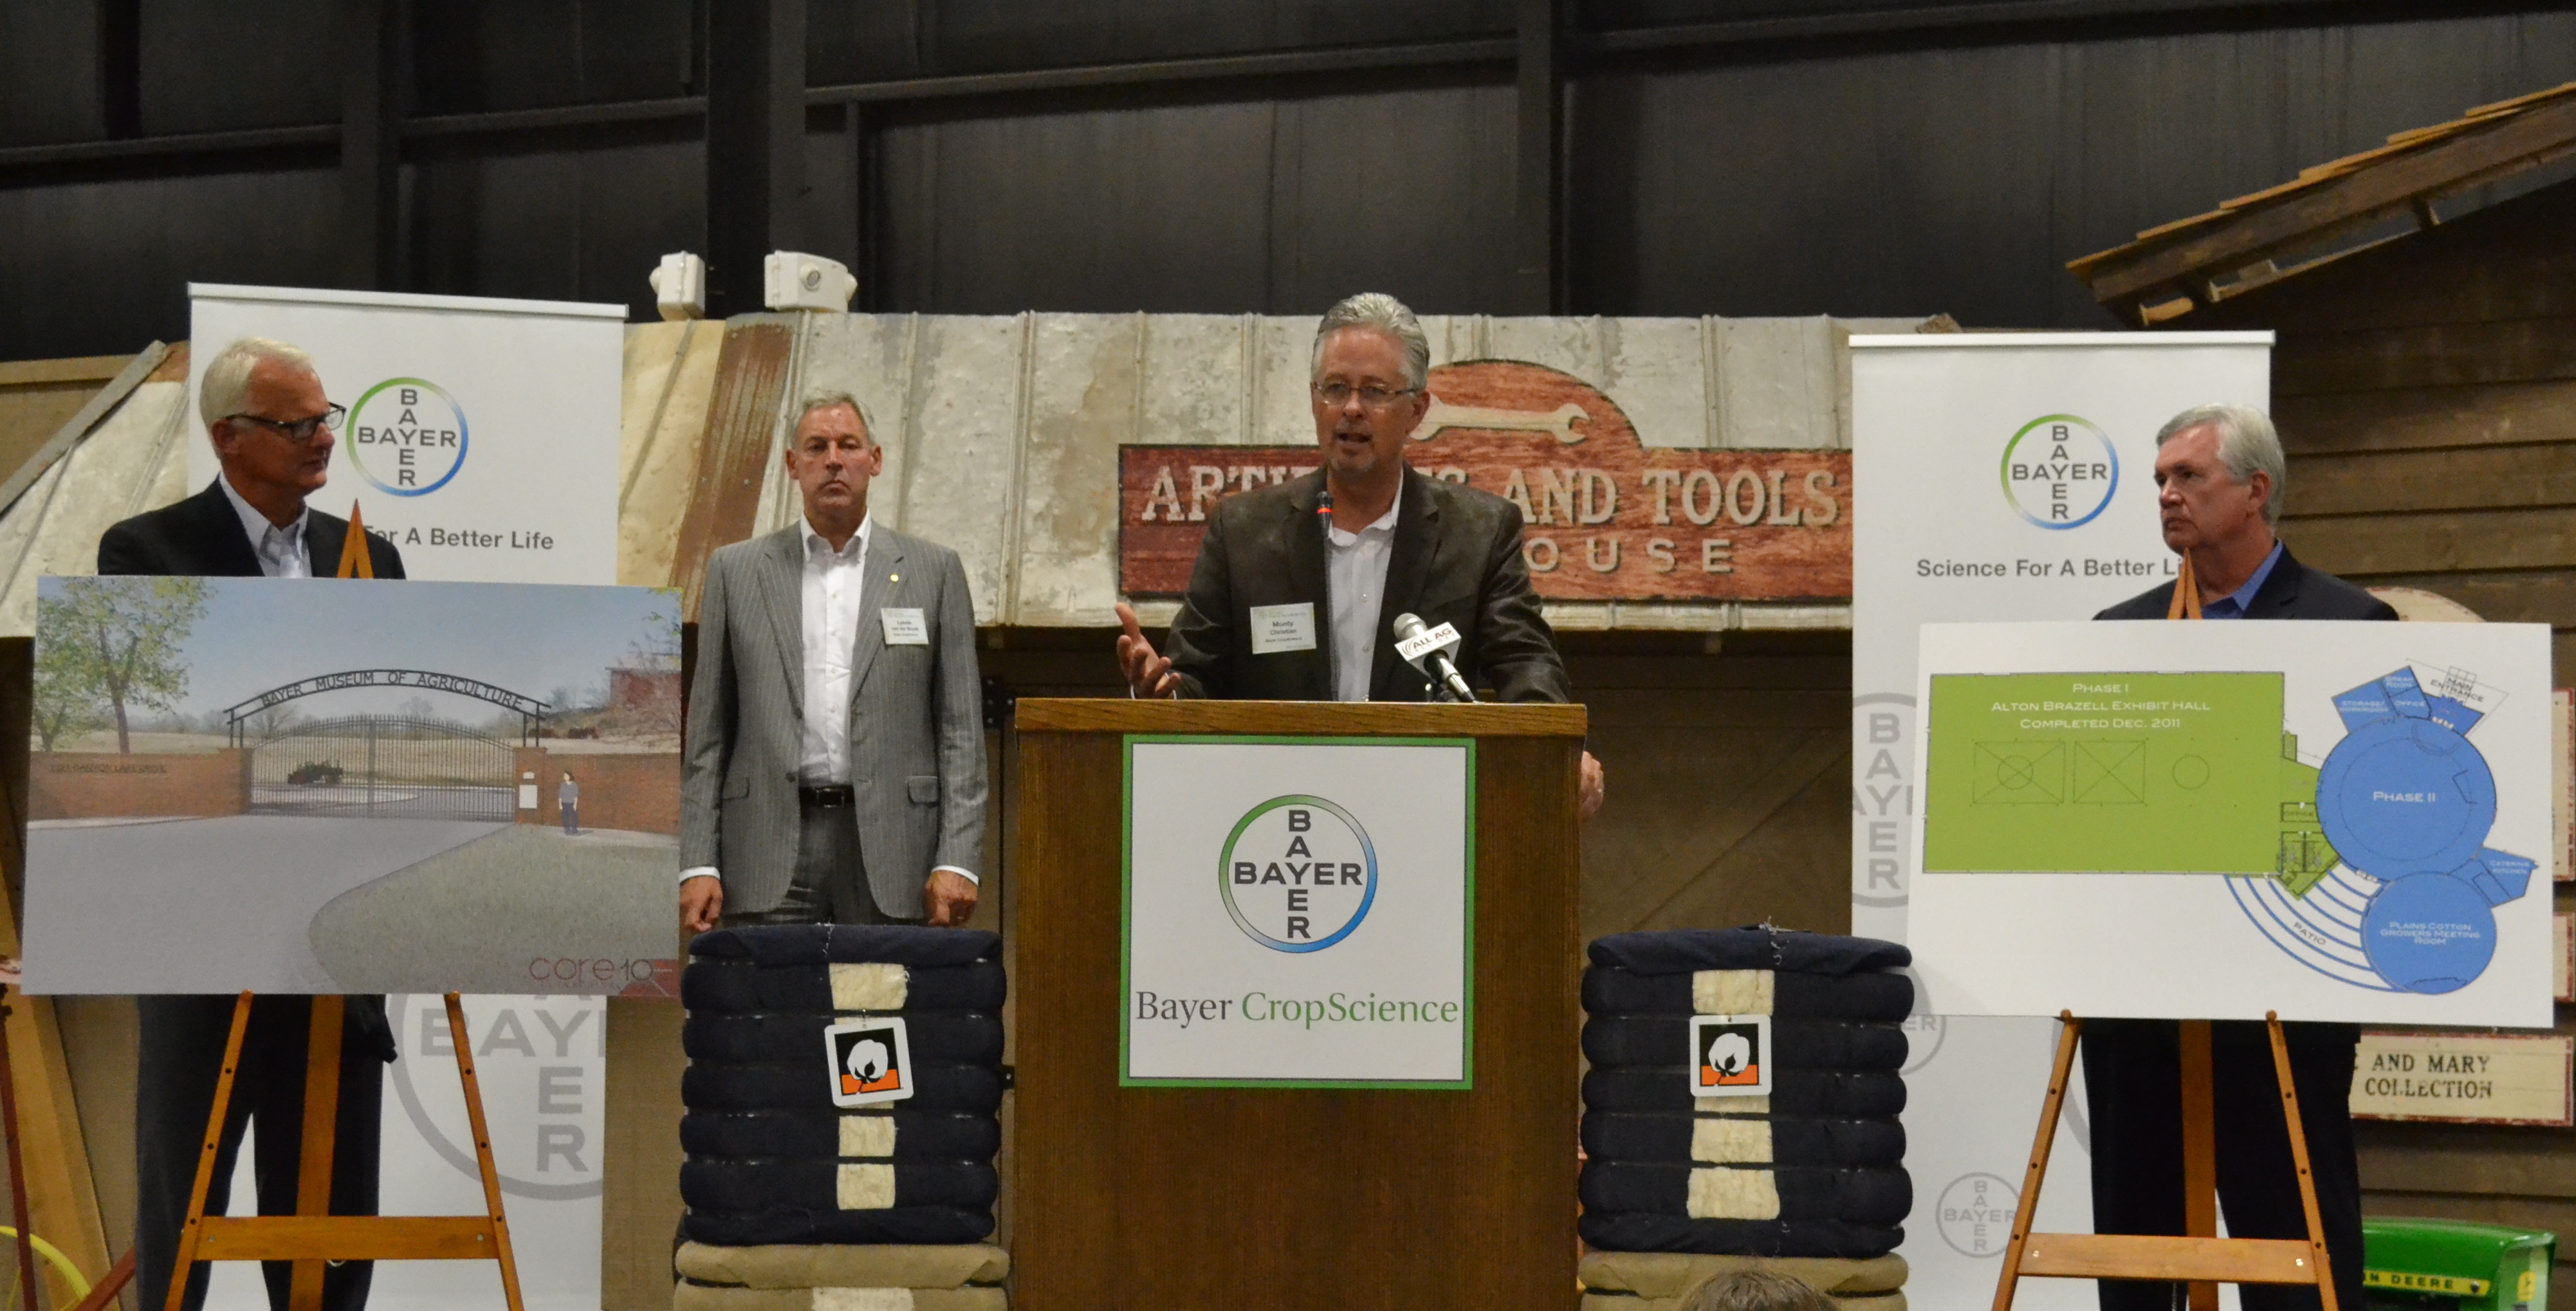 Monty Christian, vice president of U.S. cotton operations for Bayer CropScience, speaks at the Bayer Museum of Agriculture press conference.